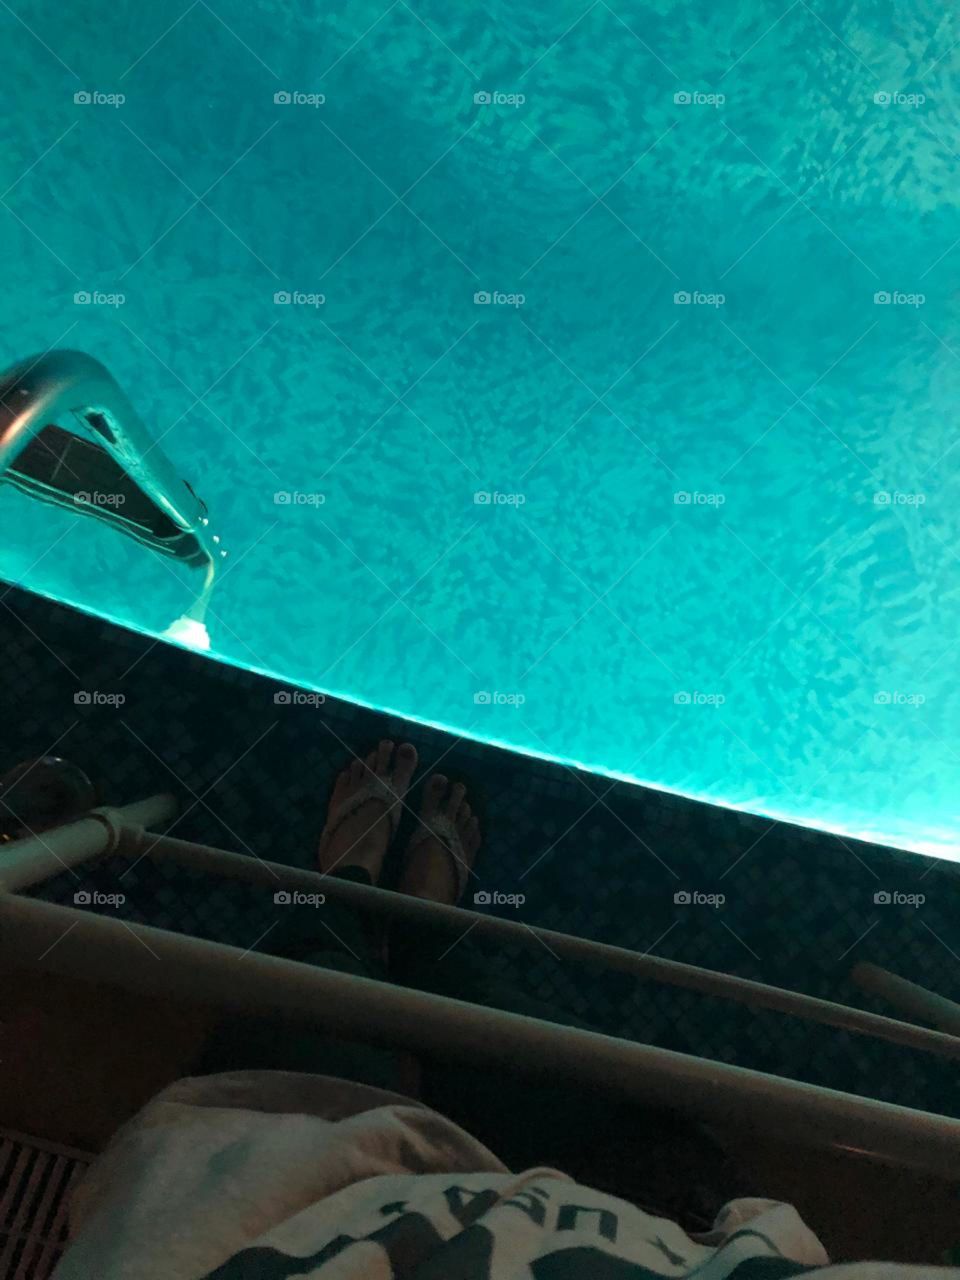 Pool and foots